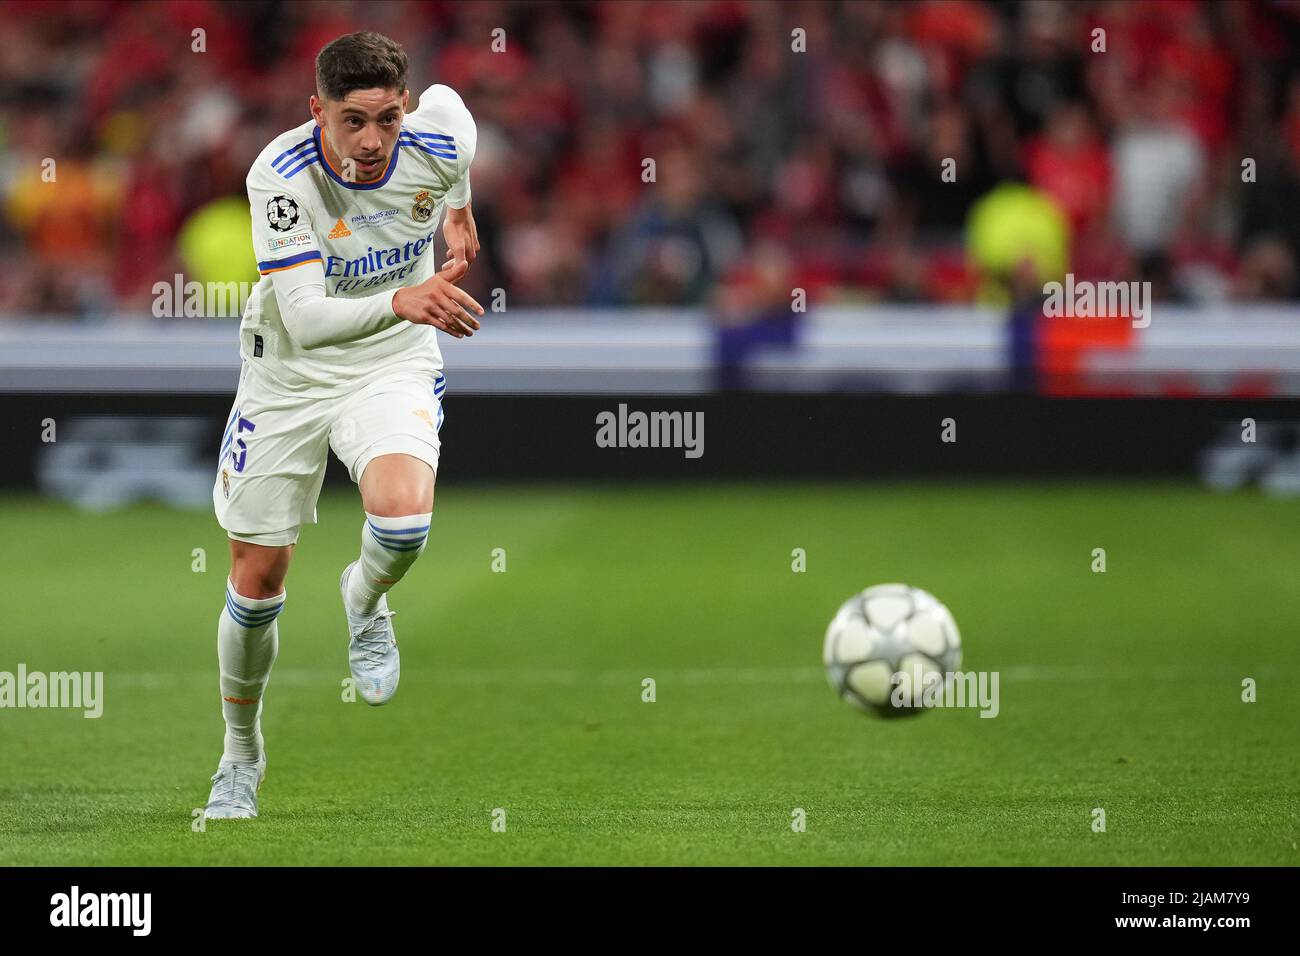 Fede Valverde of Real Madrid during the UEFA Champions League Final match between Liverpool FC and Real Madrid played at Stade de France on May 28, 2022 in Paris, France. (Photo by Magma) Stock Photo